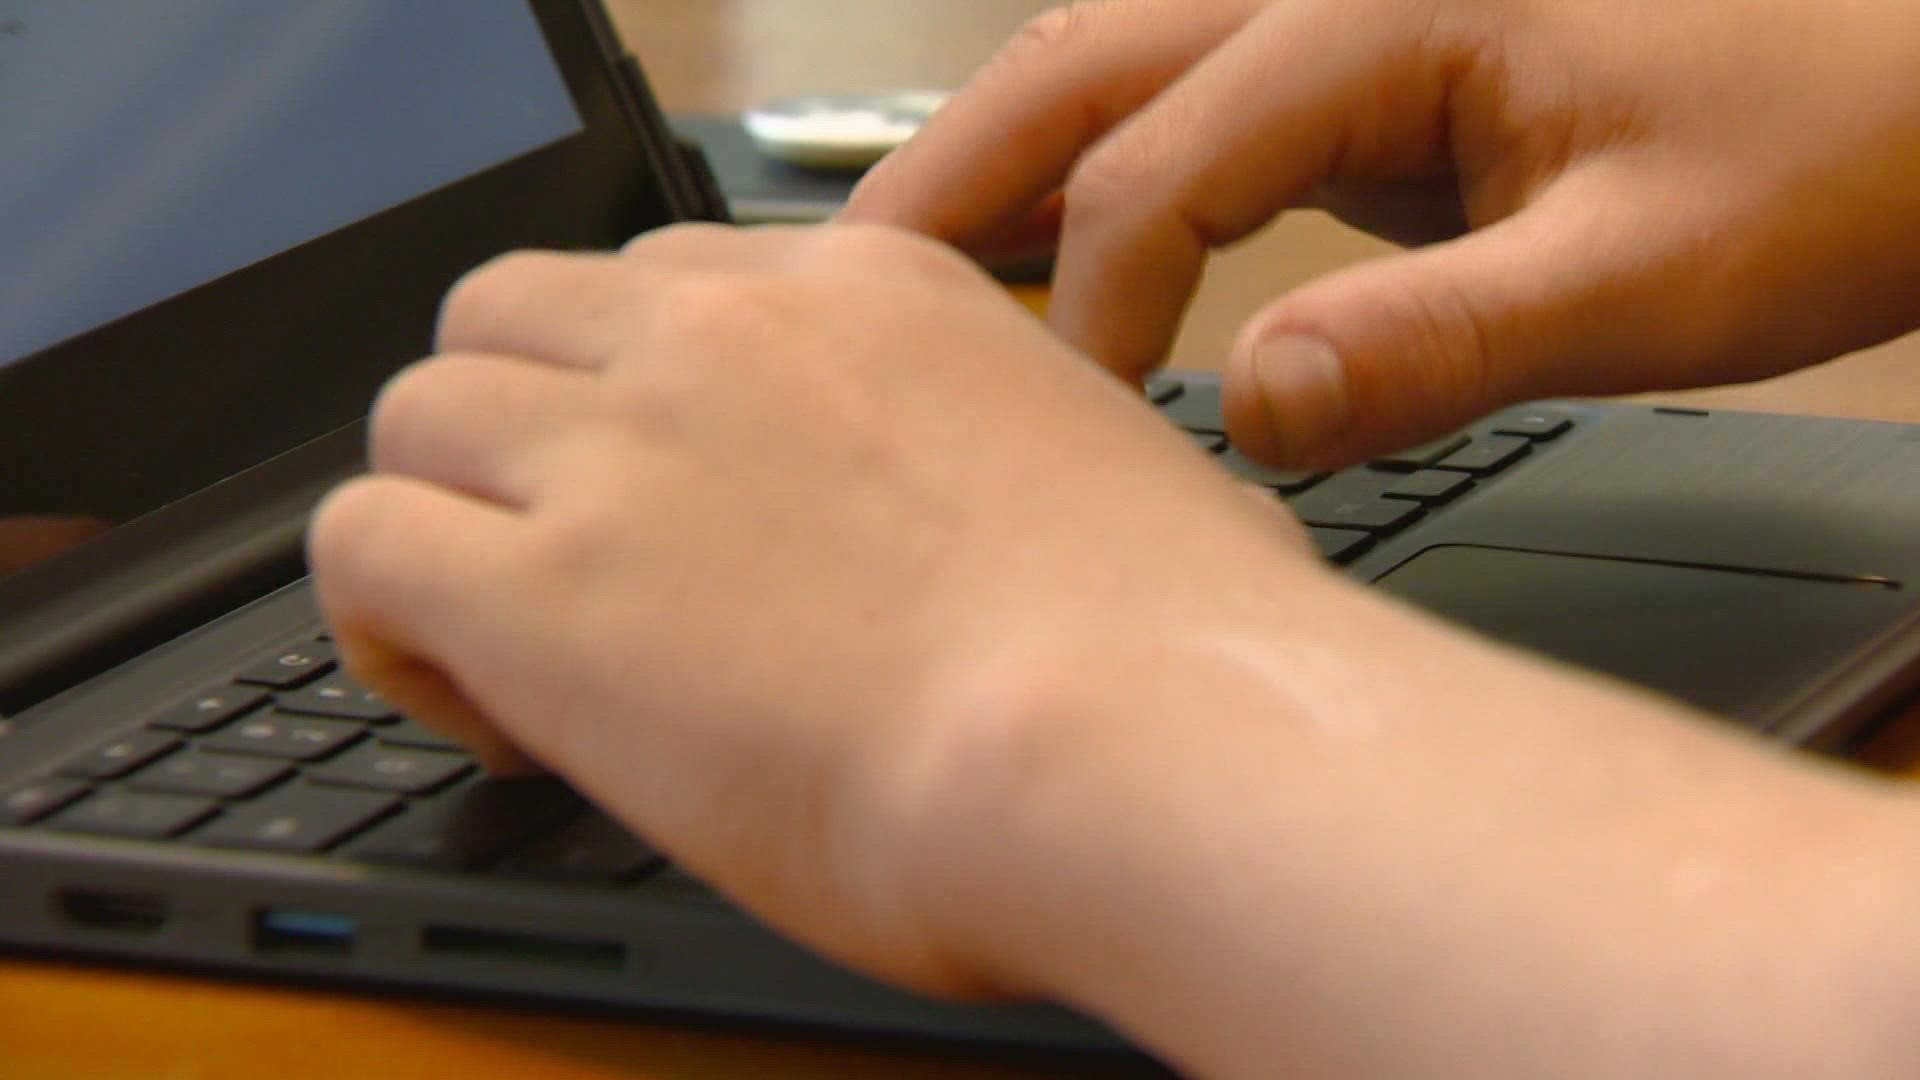 The FBI says the number of reports involving internet crimes against kids has skyrocketed locally this past year.